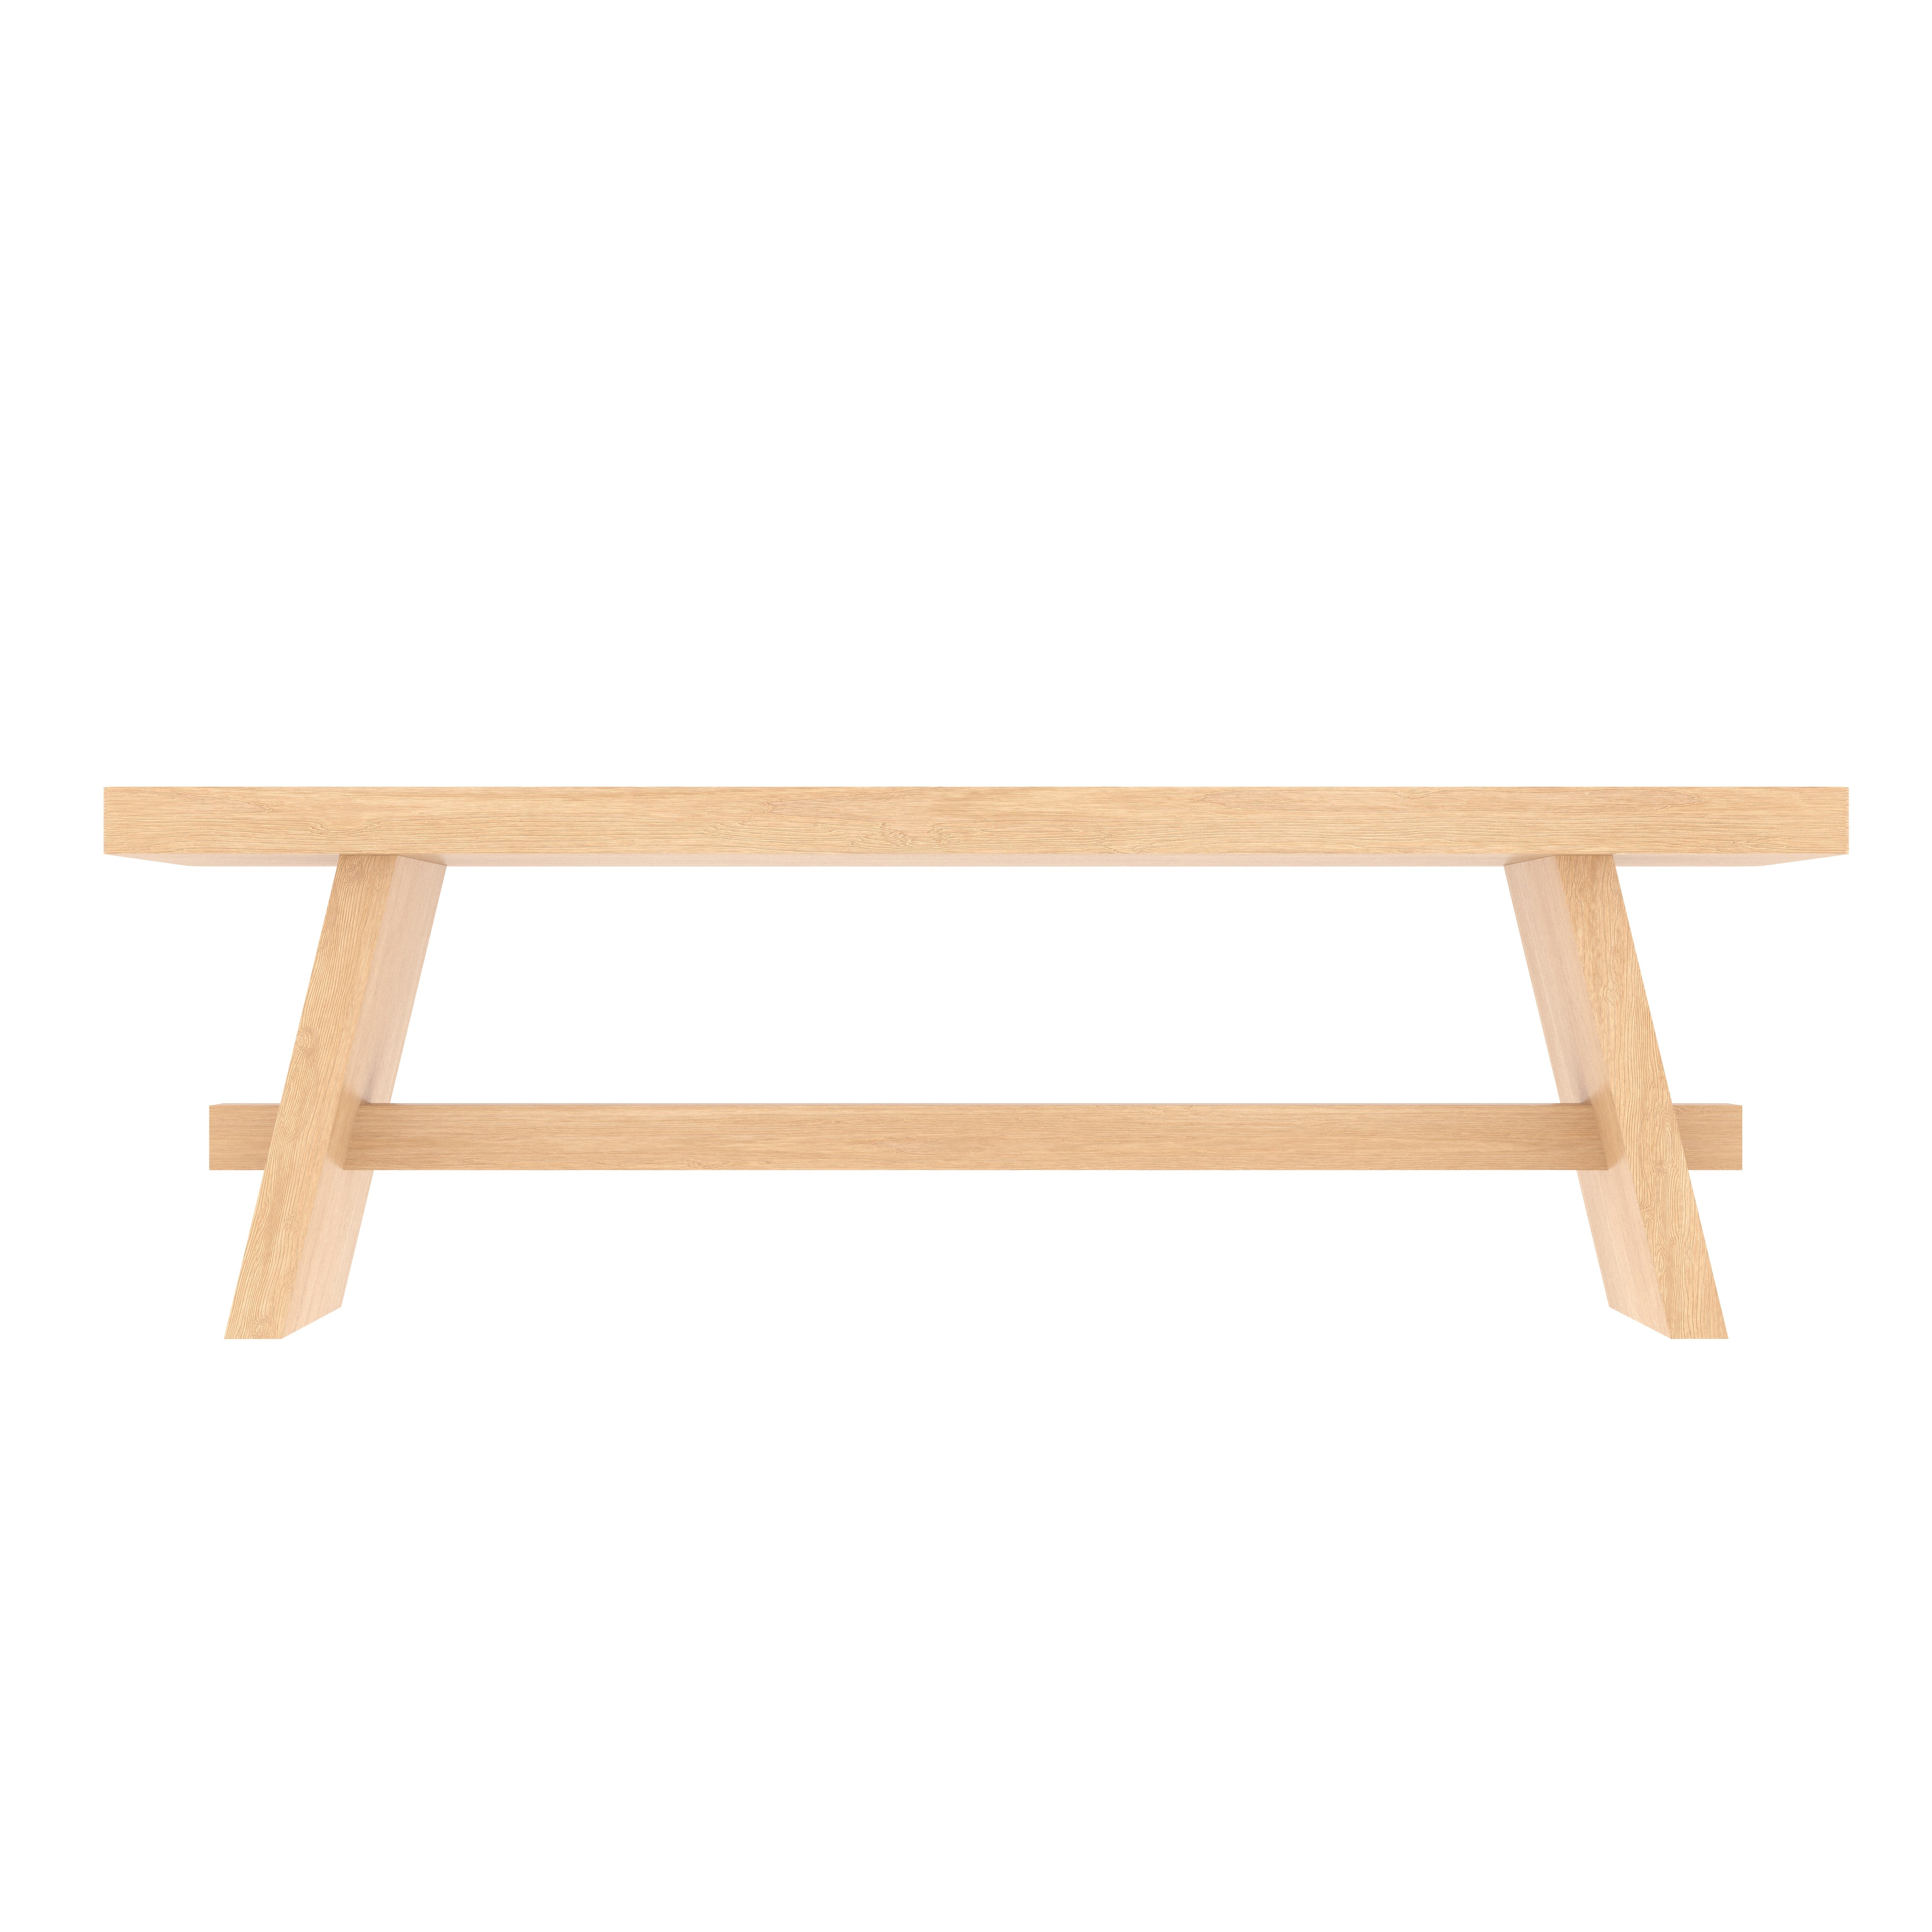 oak wood outdoor sitting table Bench